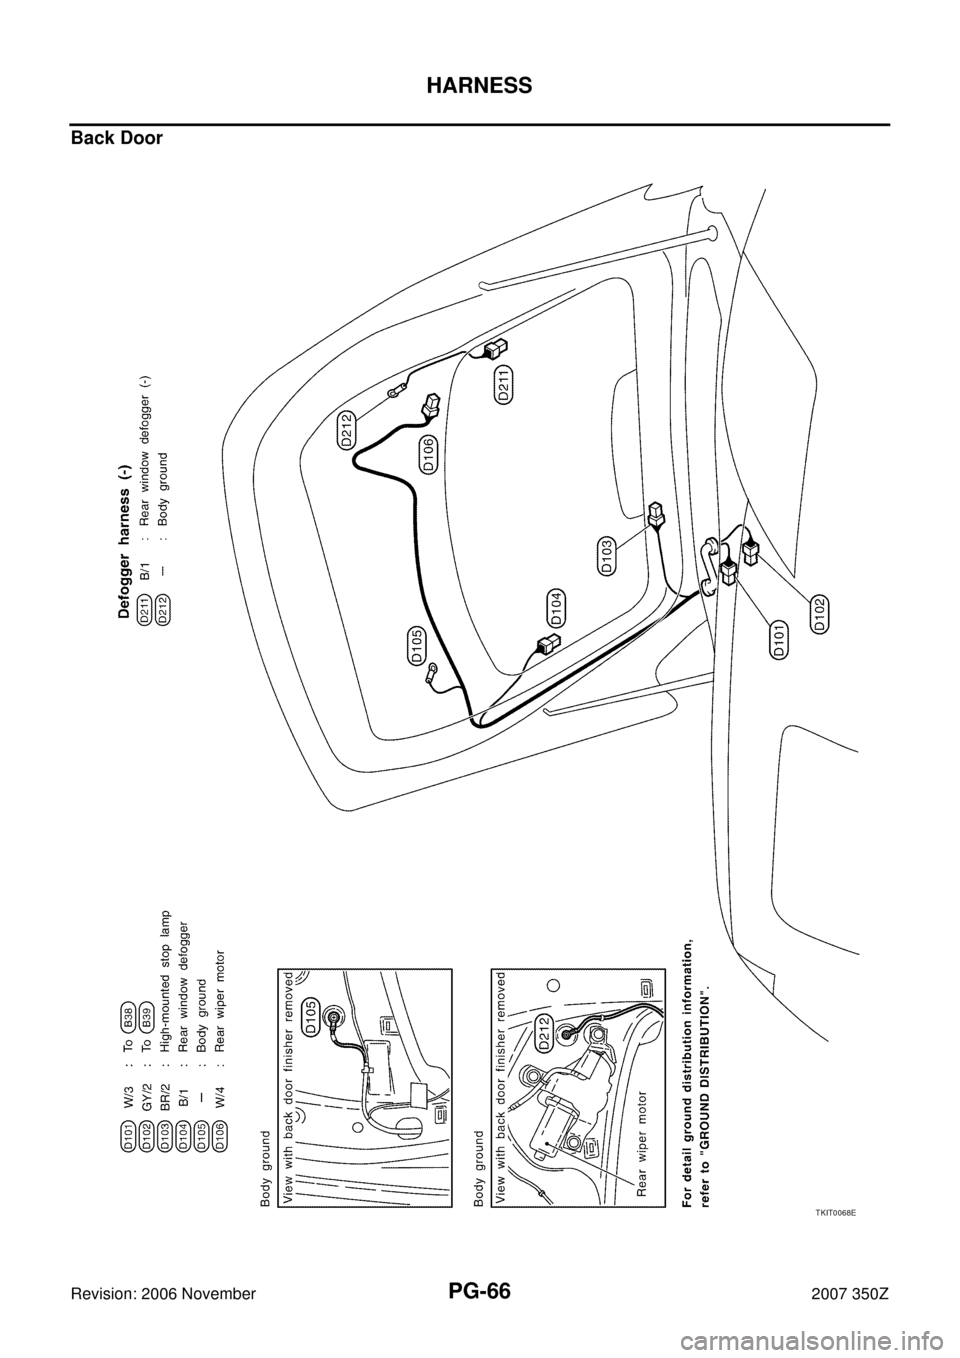 NISSAN 350Z 2007 Z33 Power Supply, Ground And Circuit Repair Manual PG-66
HARNESS
Revision: 2006 November2007 350Z
Back Door
TKIT0068E 